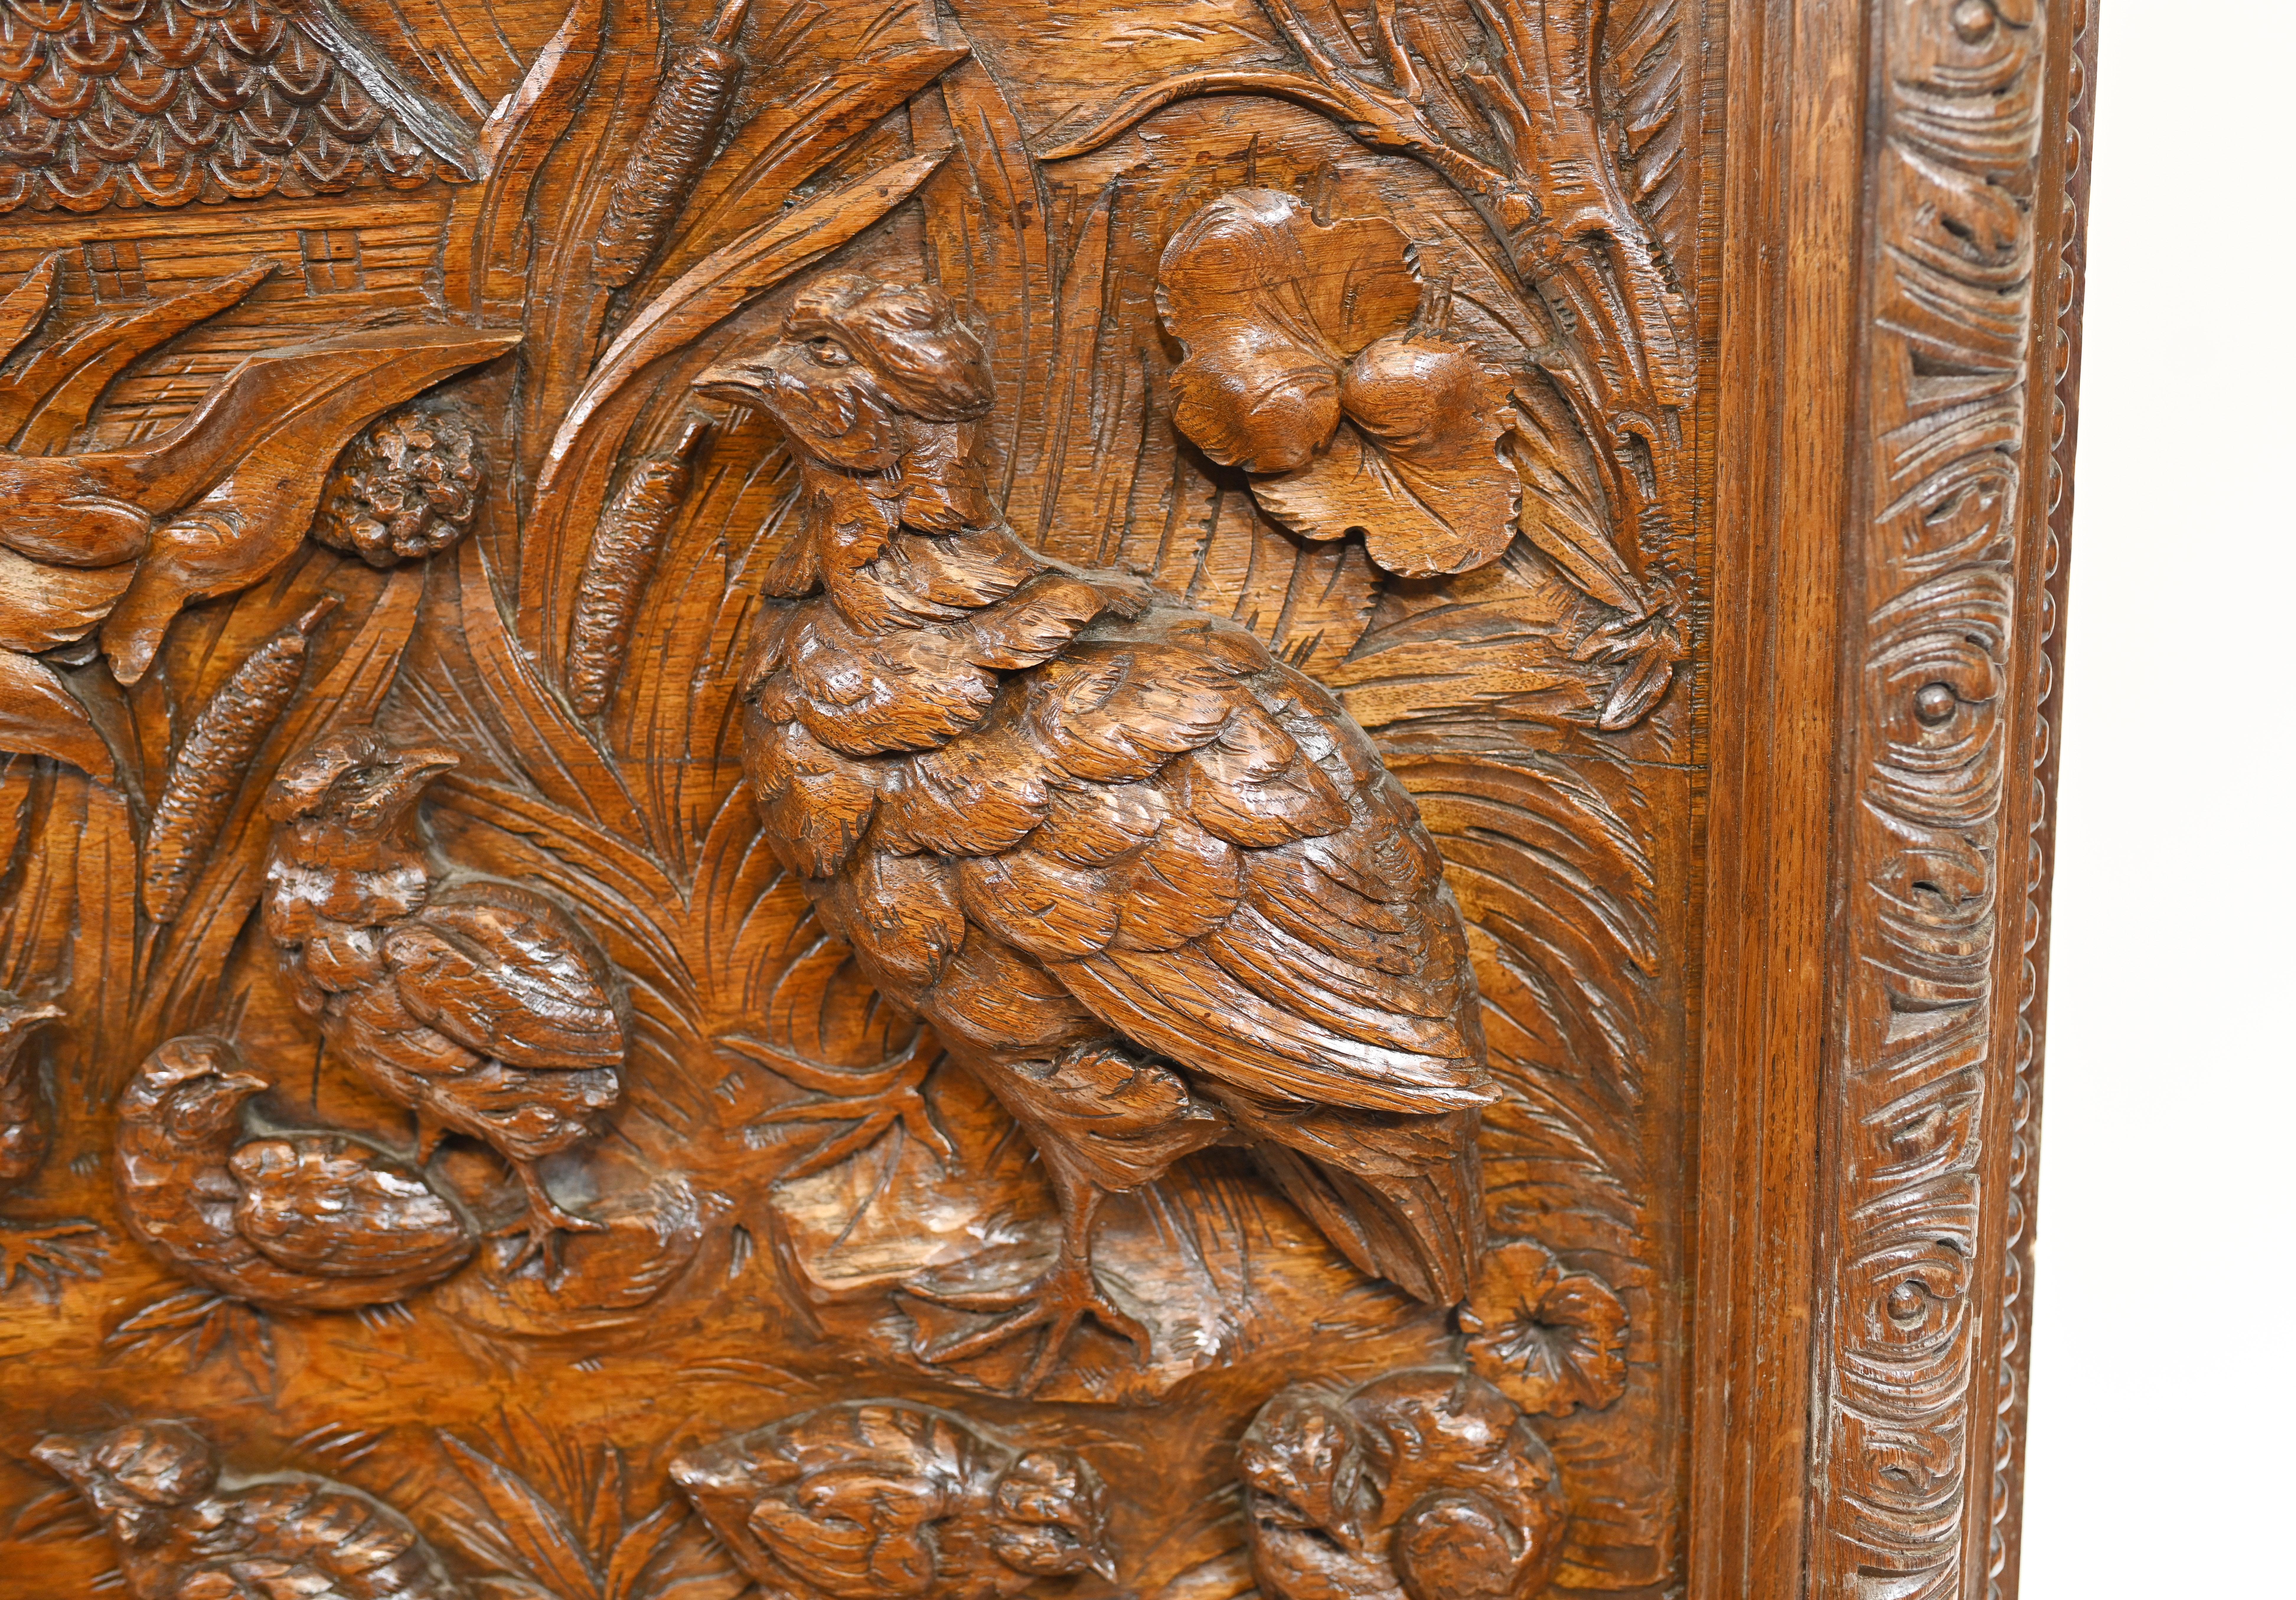 Mid-19th Century Black Forest Wall Hanging Carved Walnut Decoration 1840 For Sale